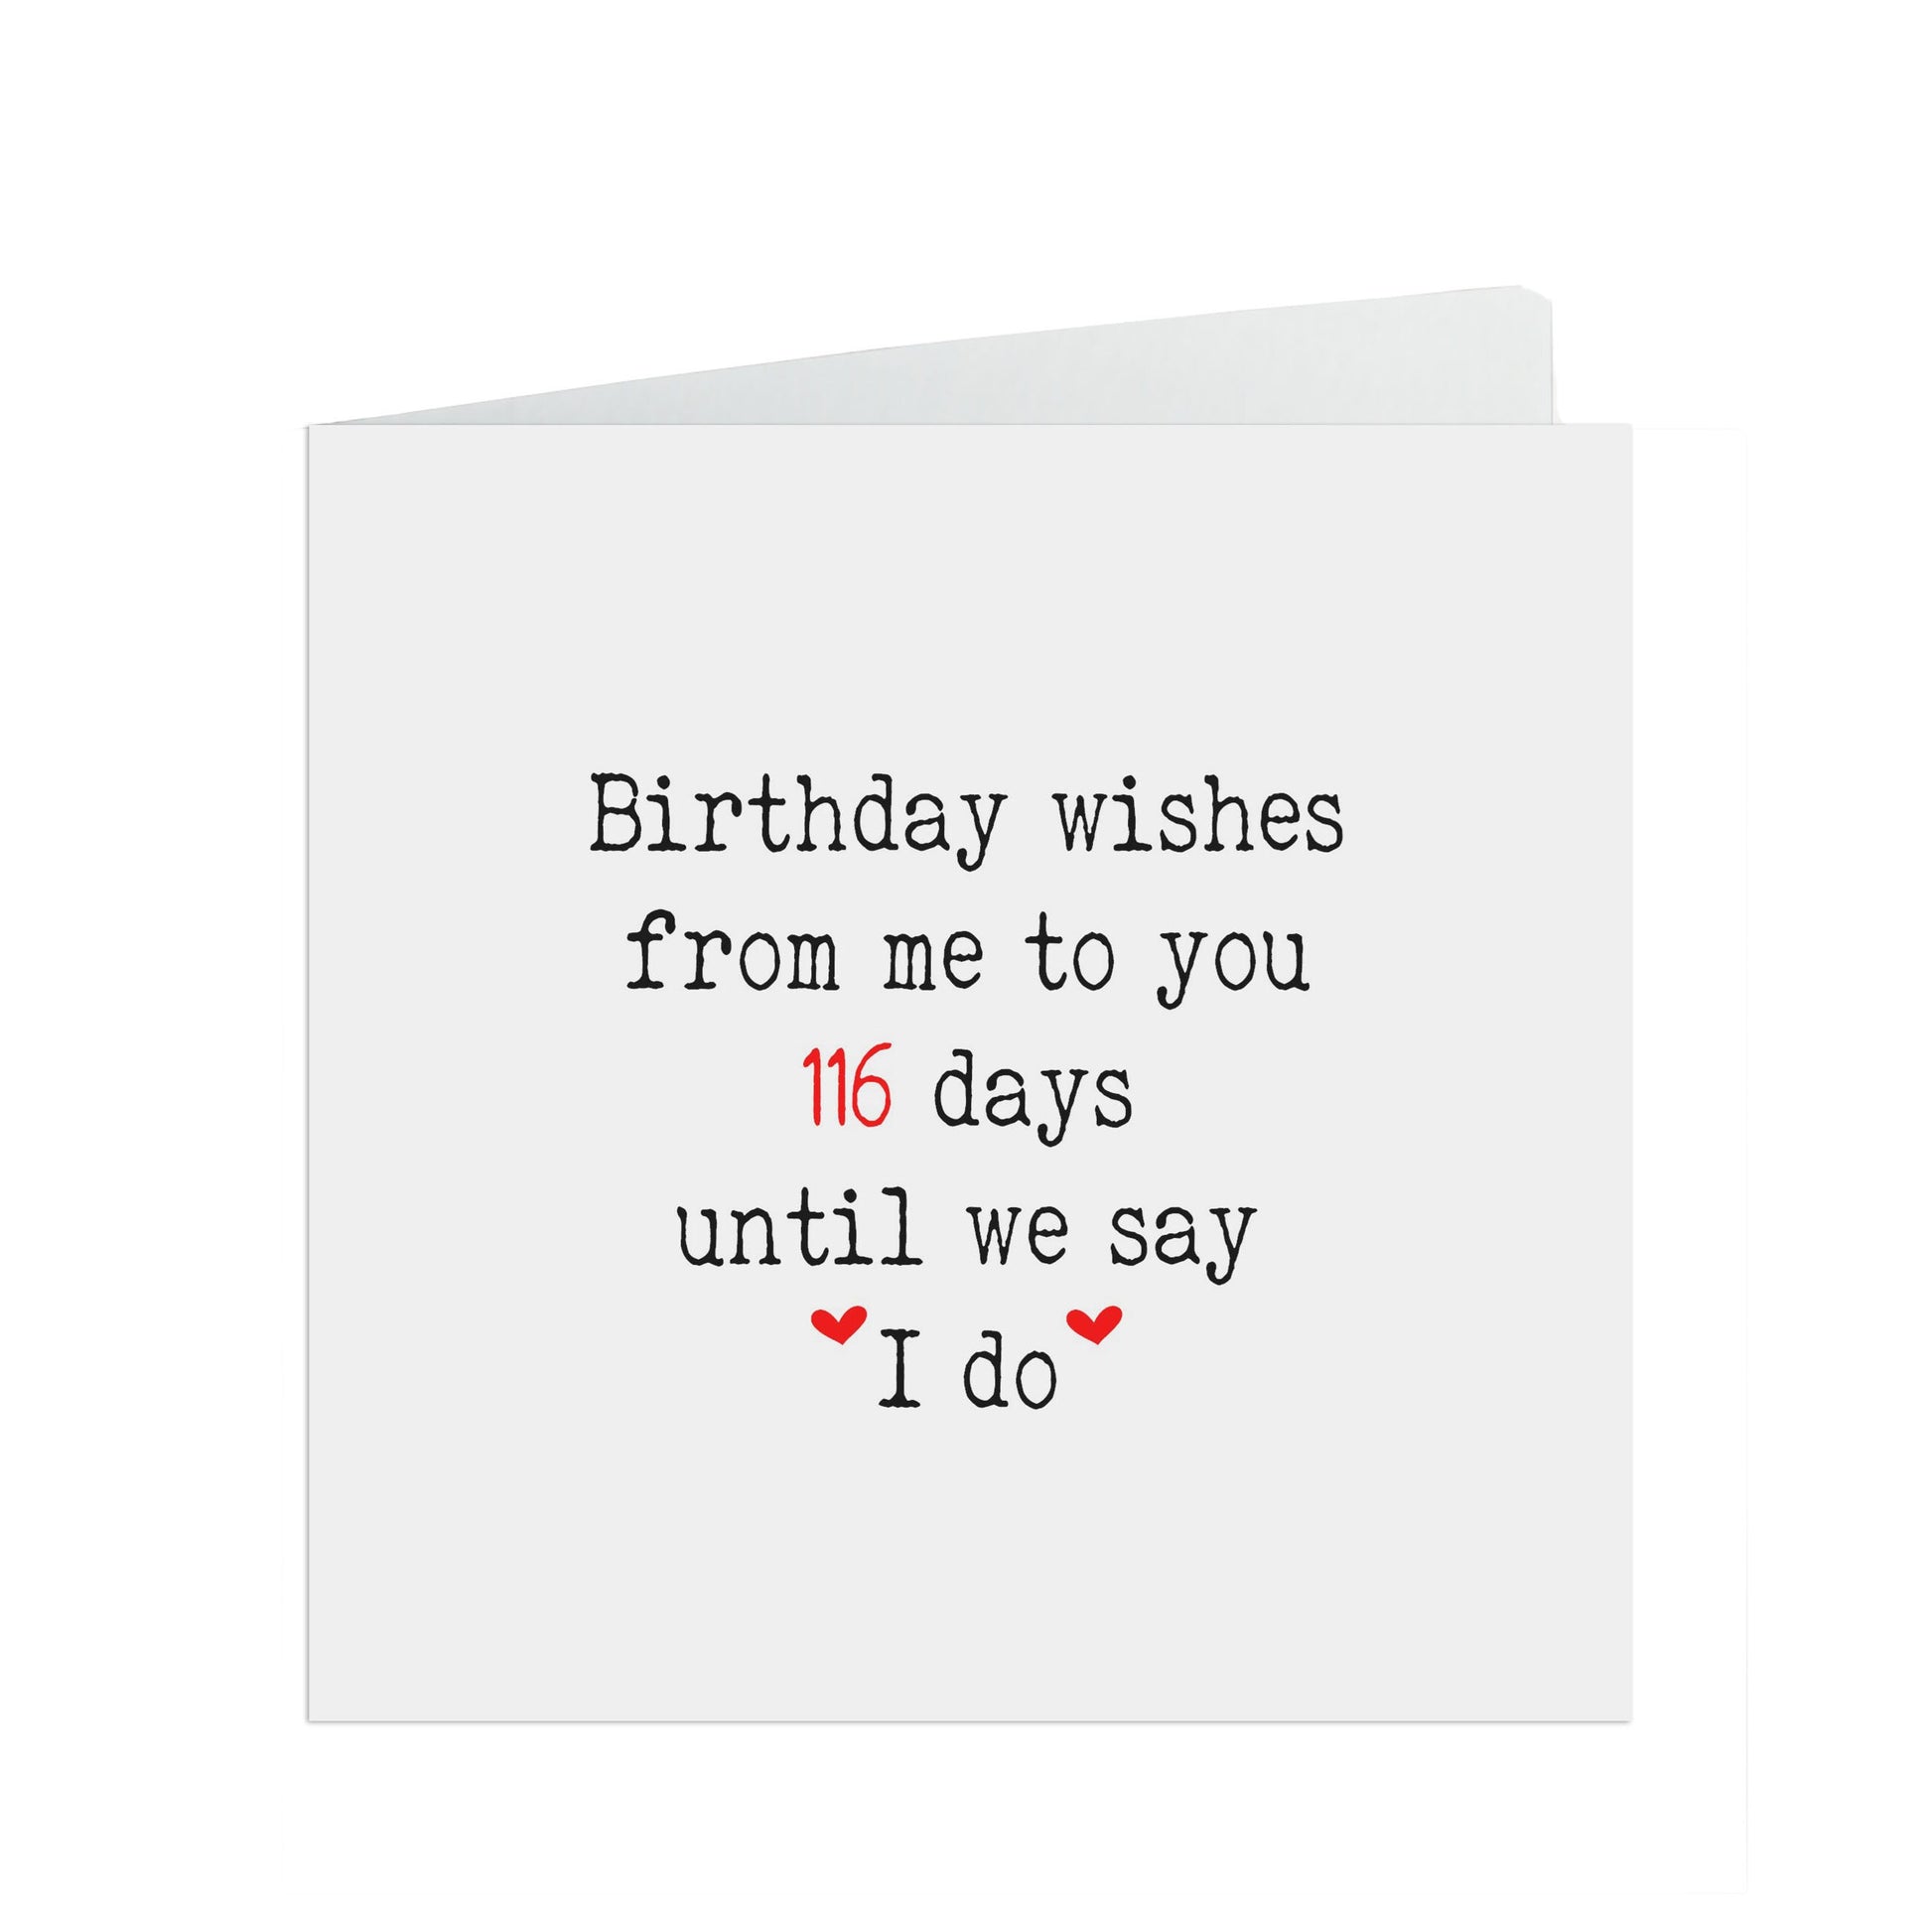 Birthday Wishes From Me To You, Romantic Card For Fiance Or Fiancee